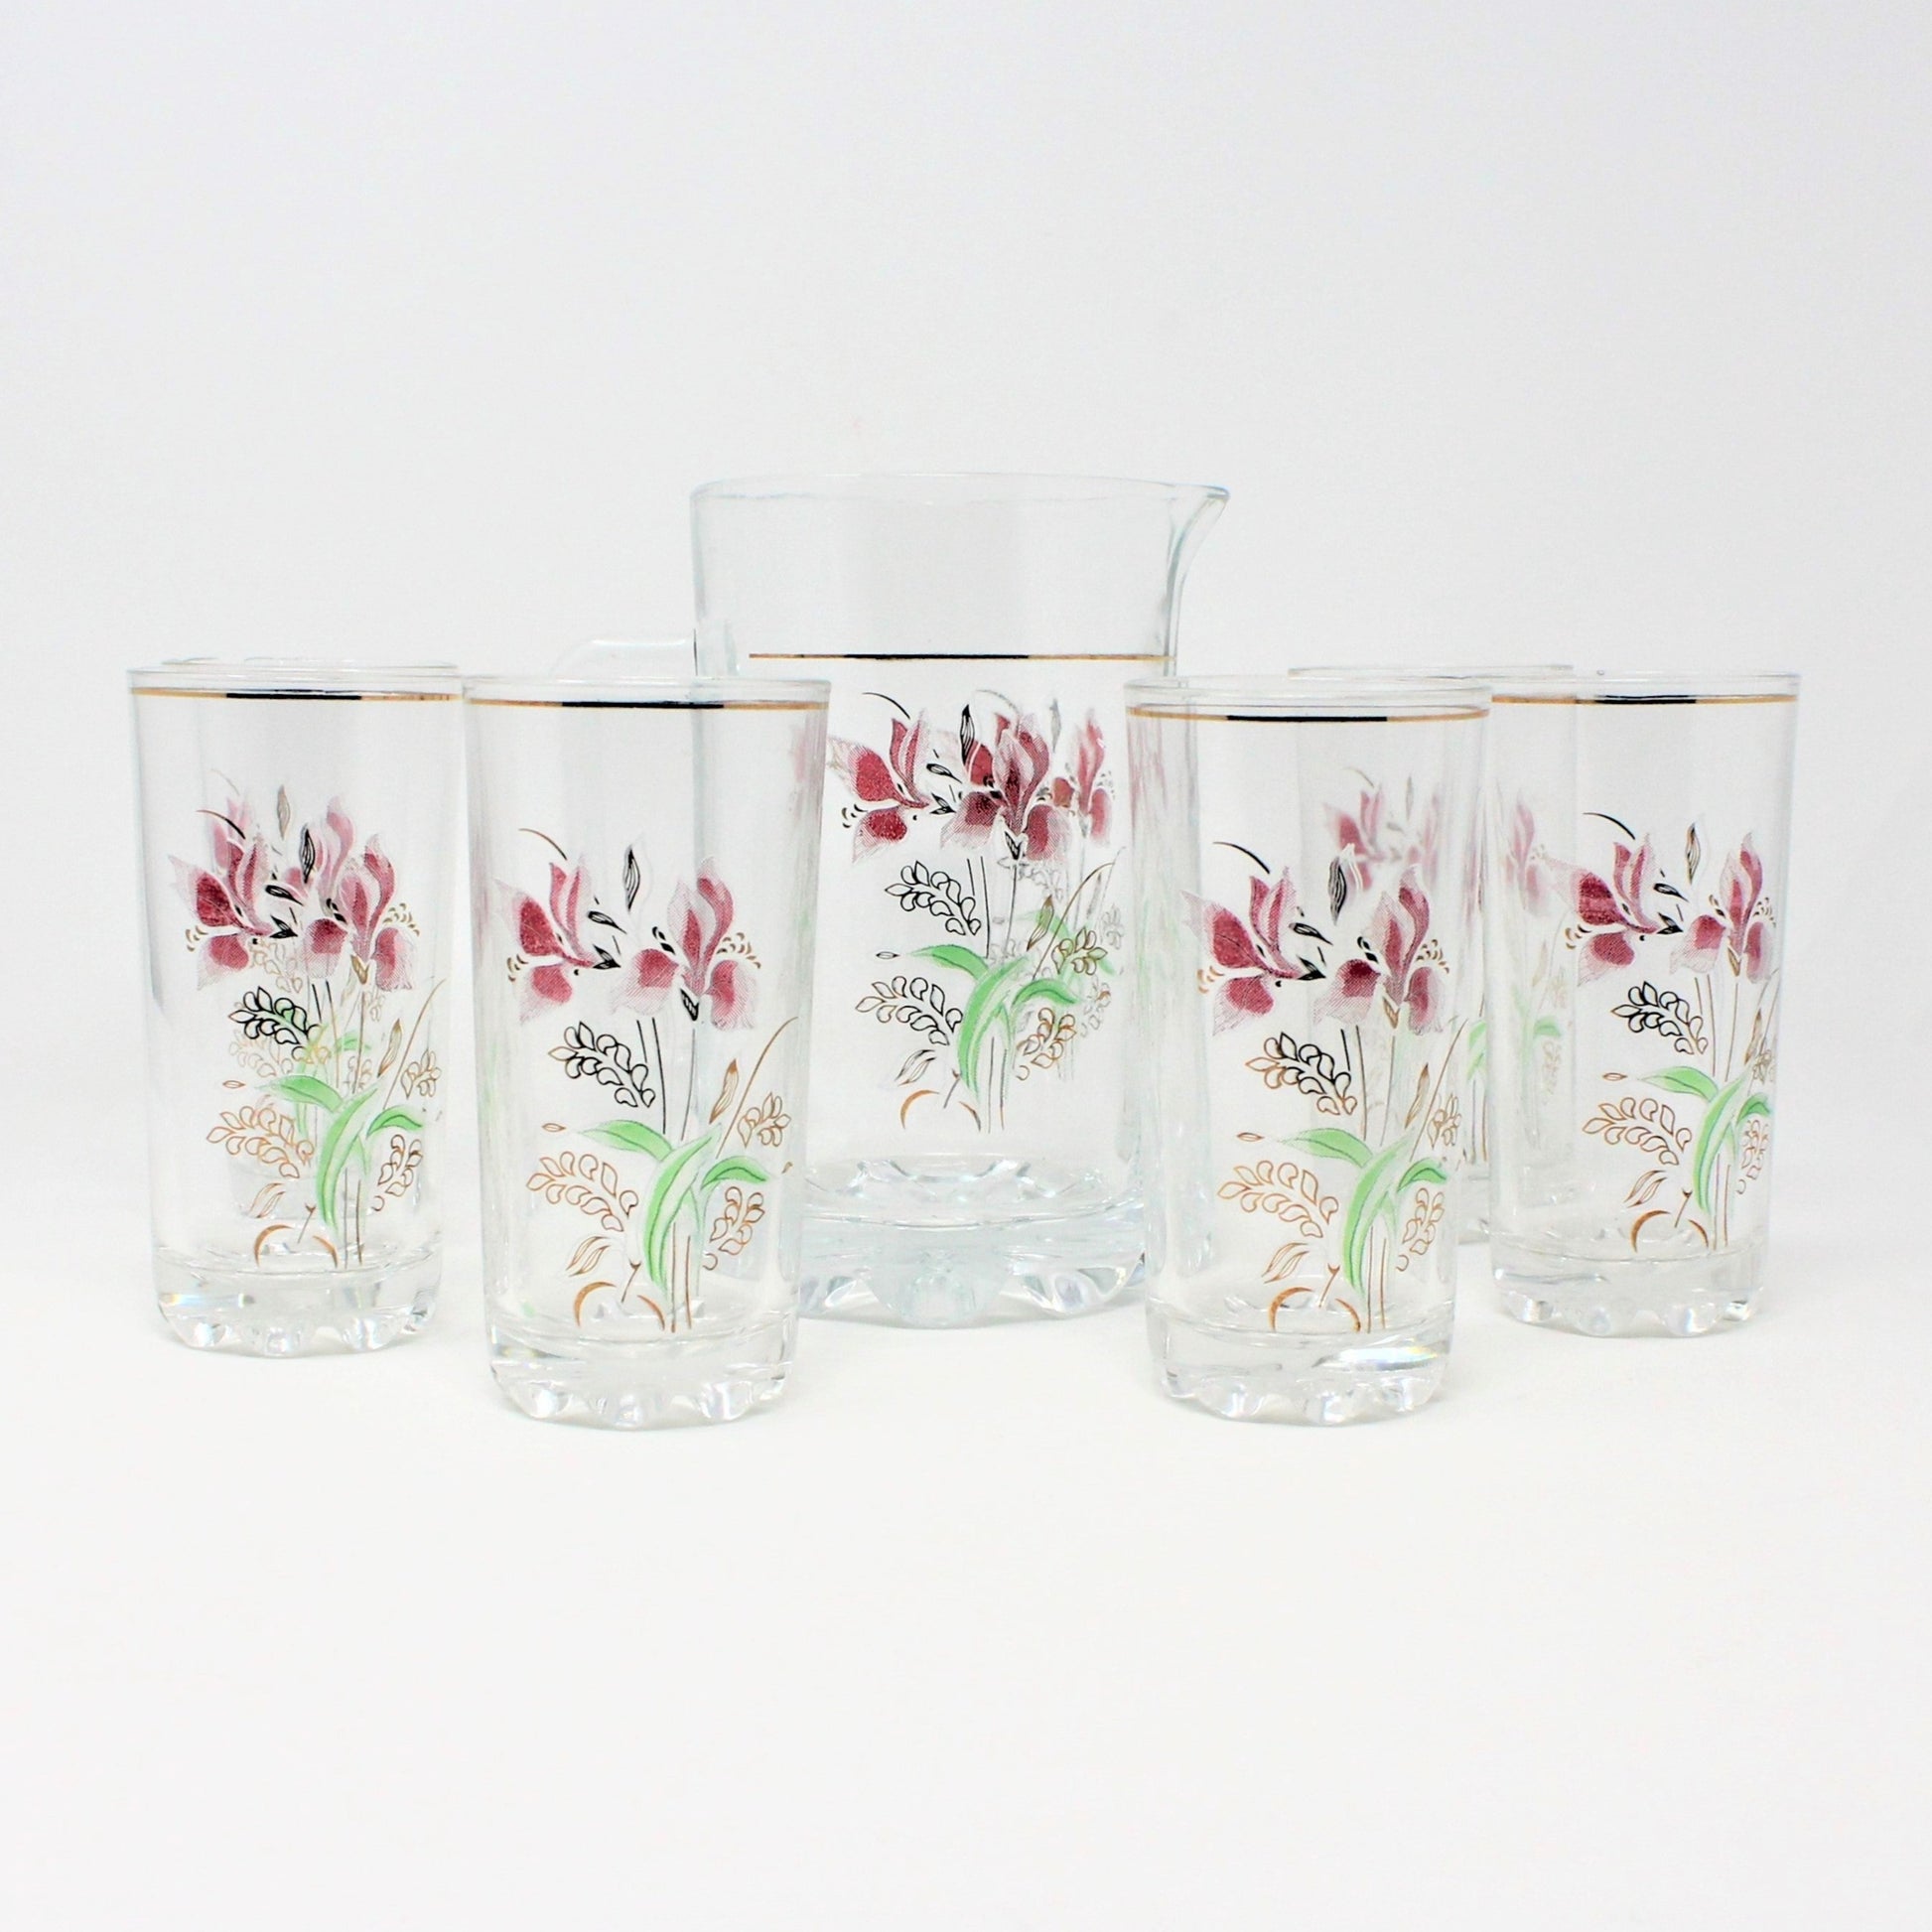 Italian Colorful Victorian Floral Rim Wine Glasses Set Of 6 With Gold  Accents 